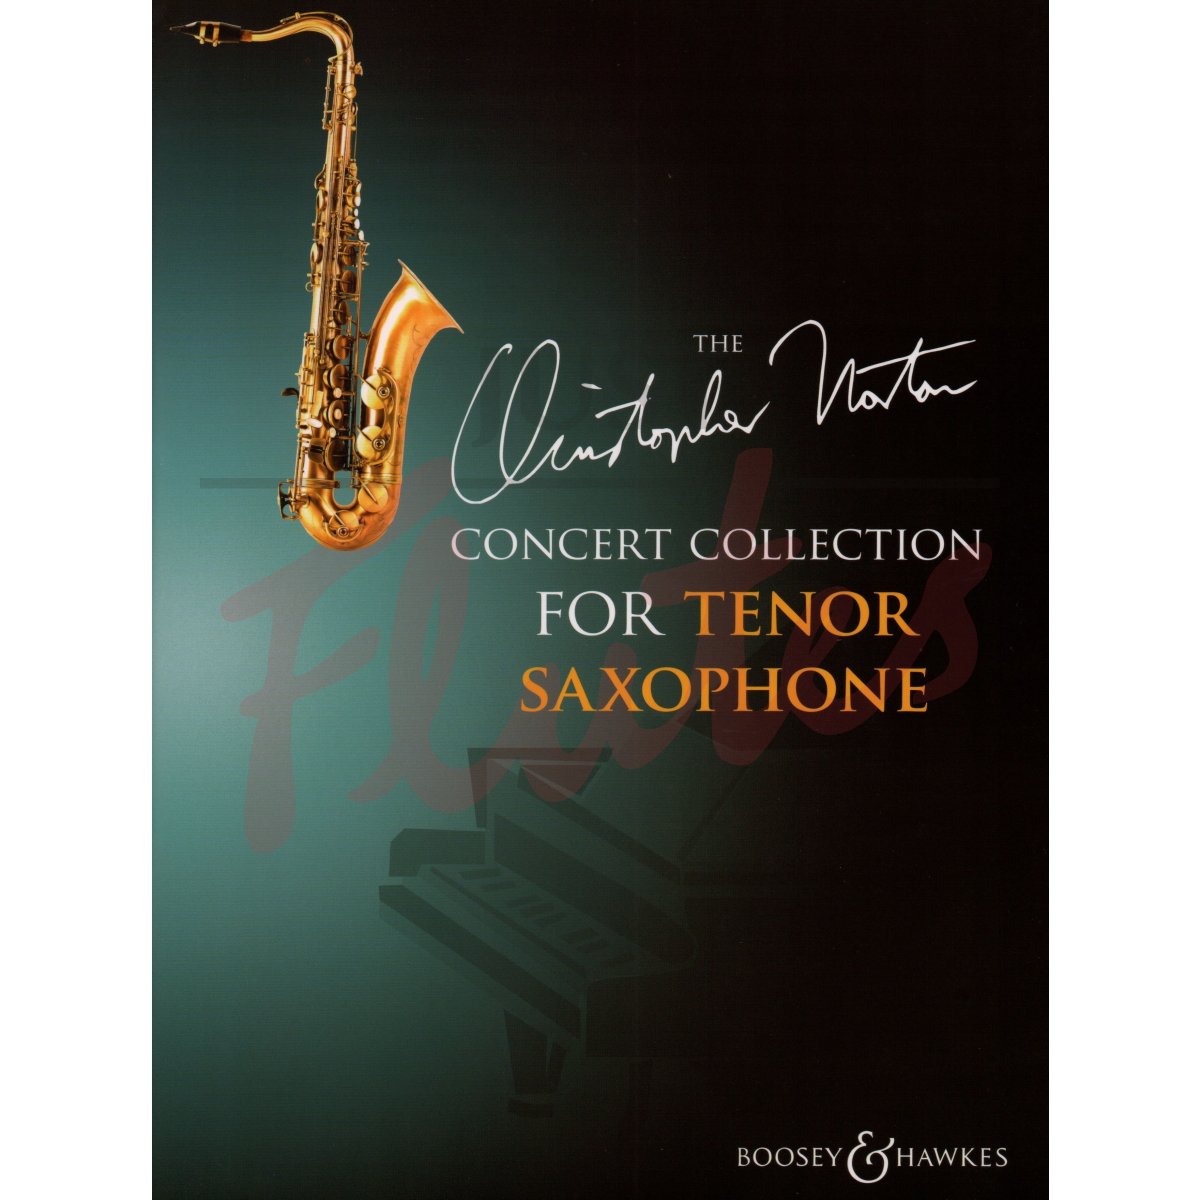 The Christopher Norton Concert Collection for Tenor Saxophone